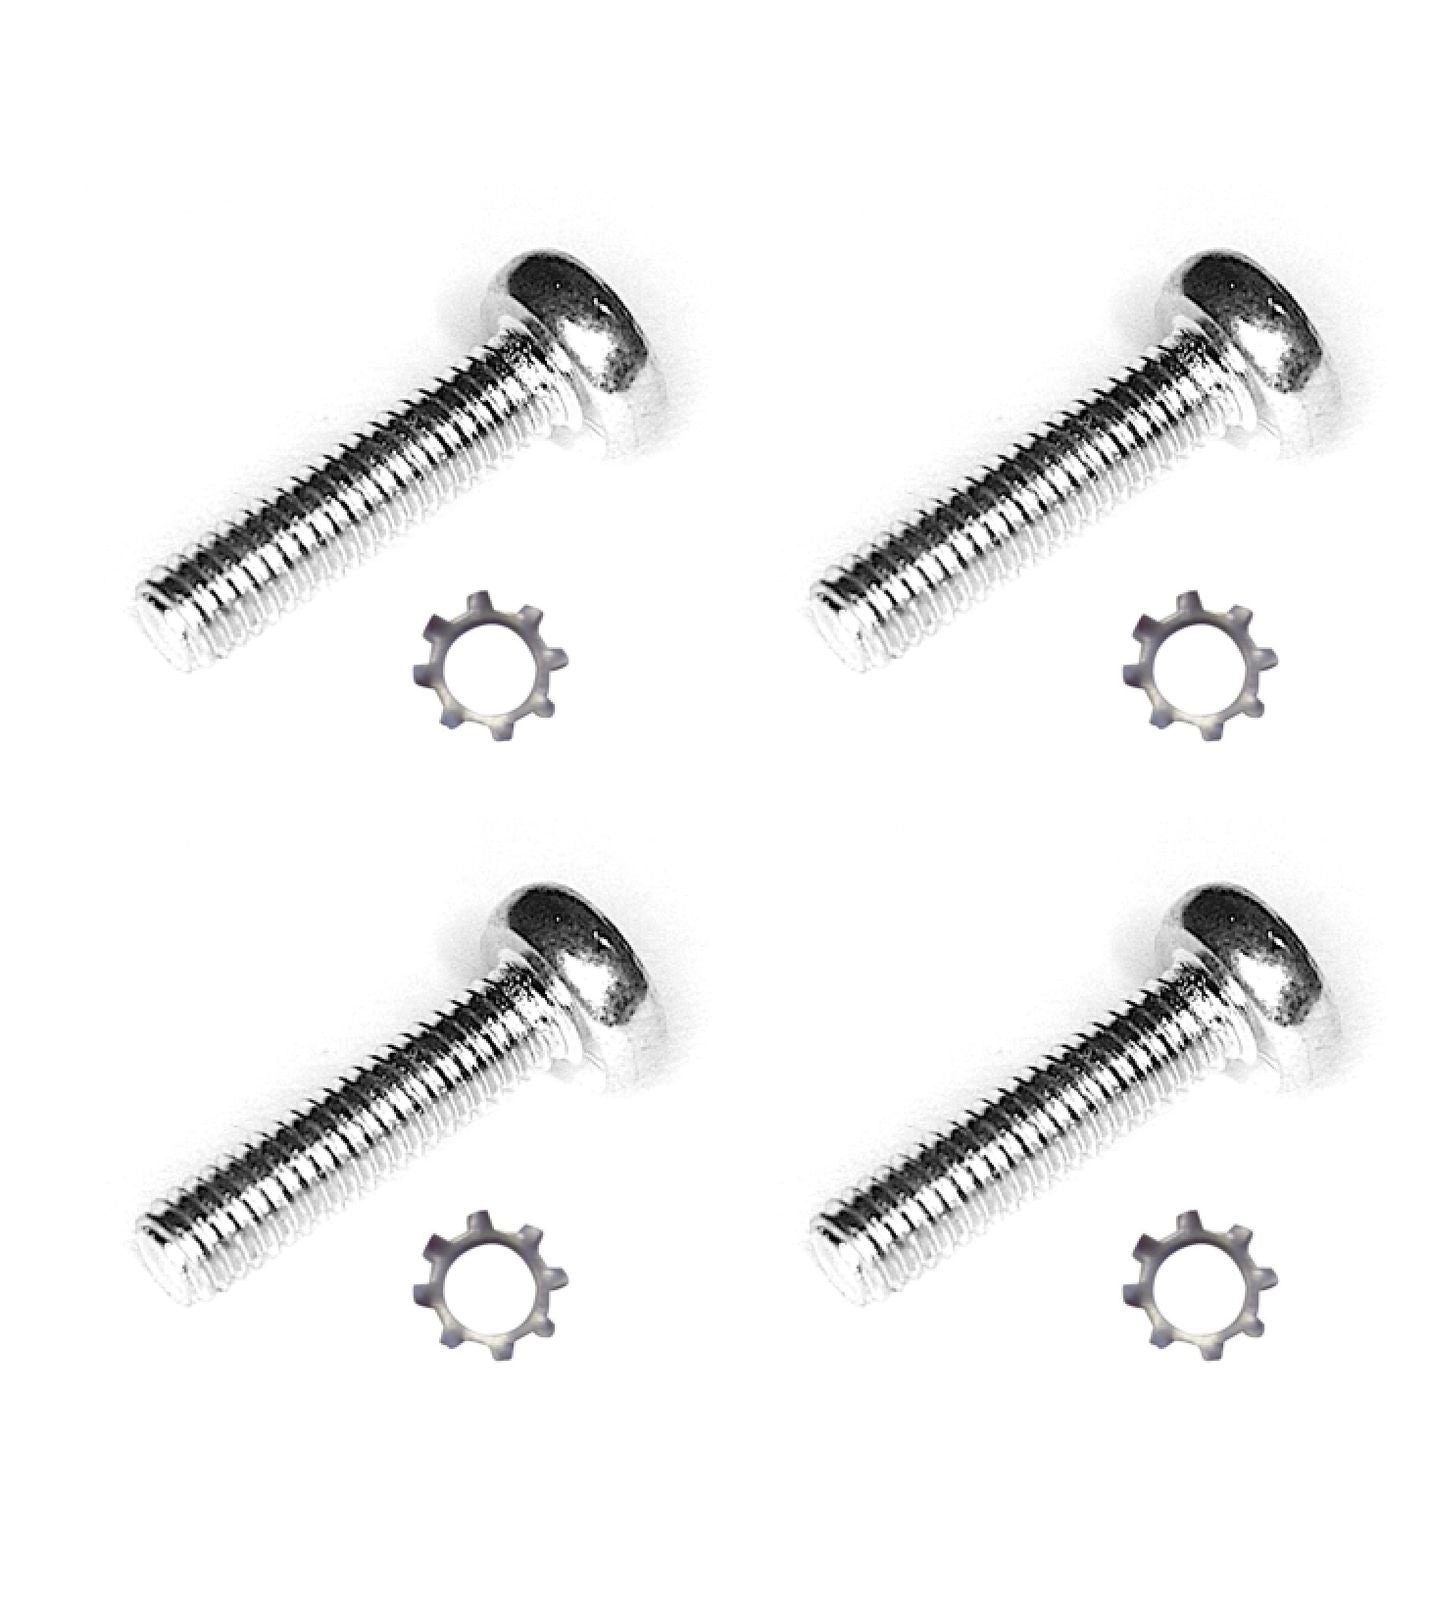 LG Screws for LCD TV Stand, Base, Bracket M4 x 20mm FAB30016106 - Spared Parts UK